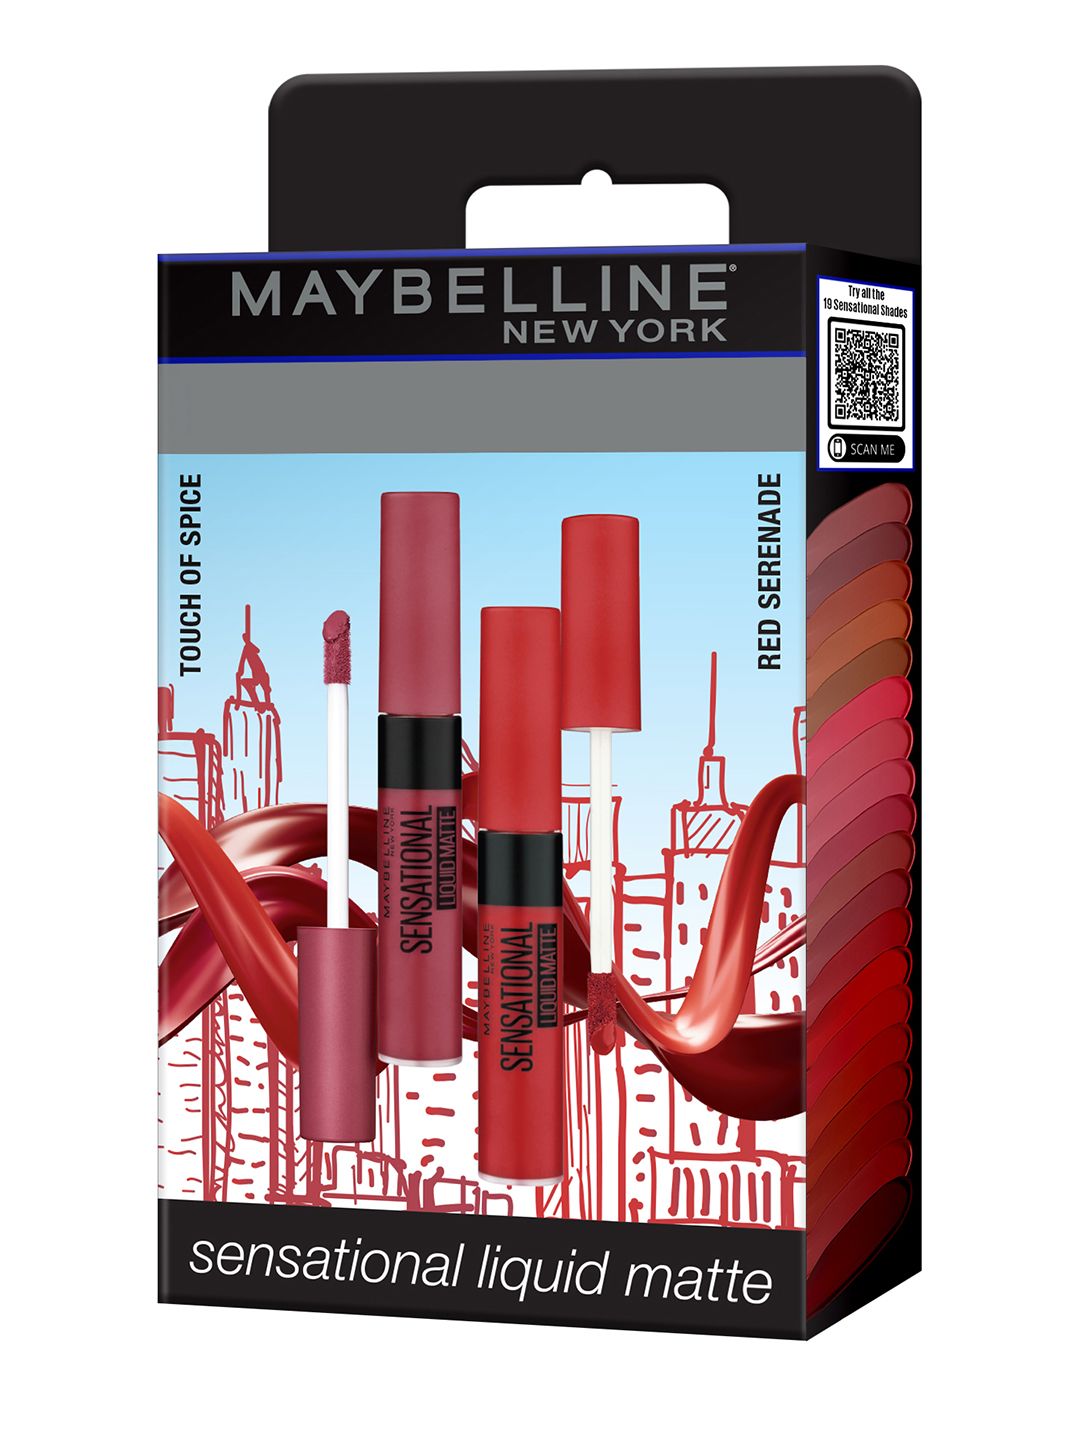 Maybelline Sensational Liquid Matte Lipsticks Combo - Touch of Spice 24 + Red Serenade 14 Price in India